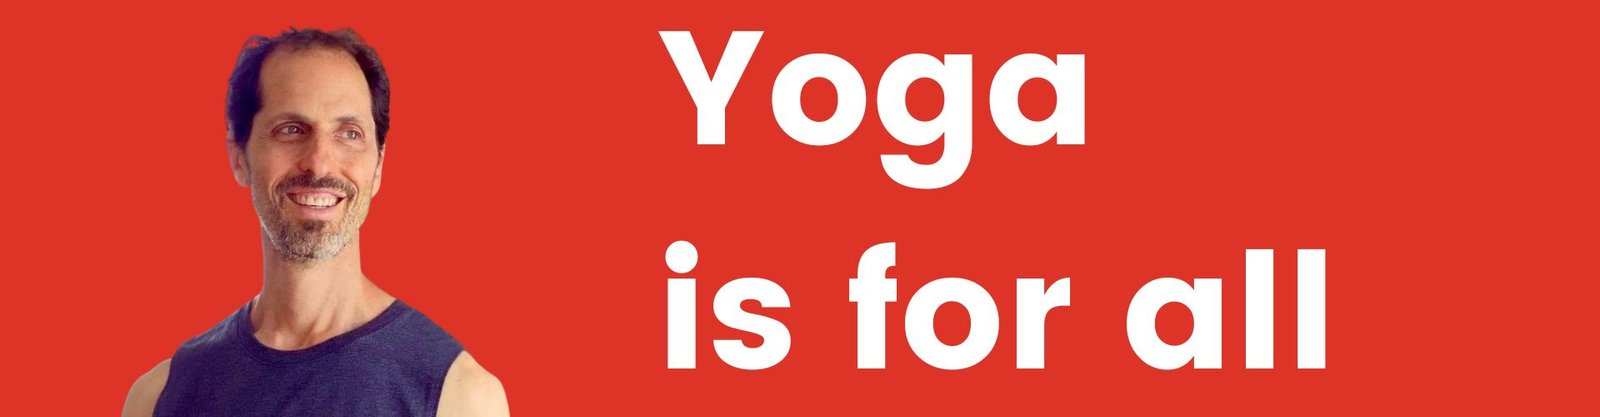 Yoga is for all by Michael Stein